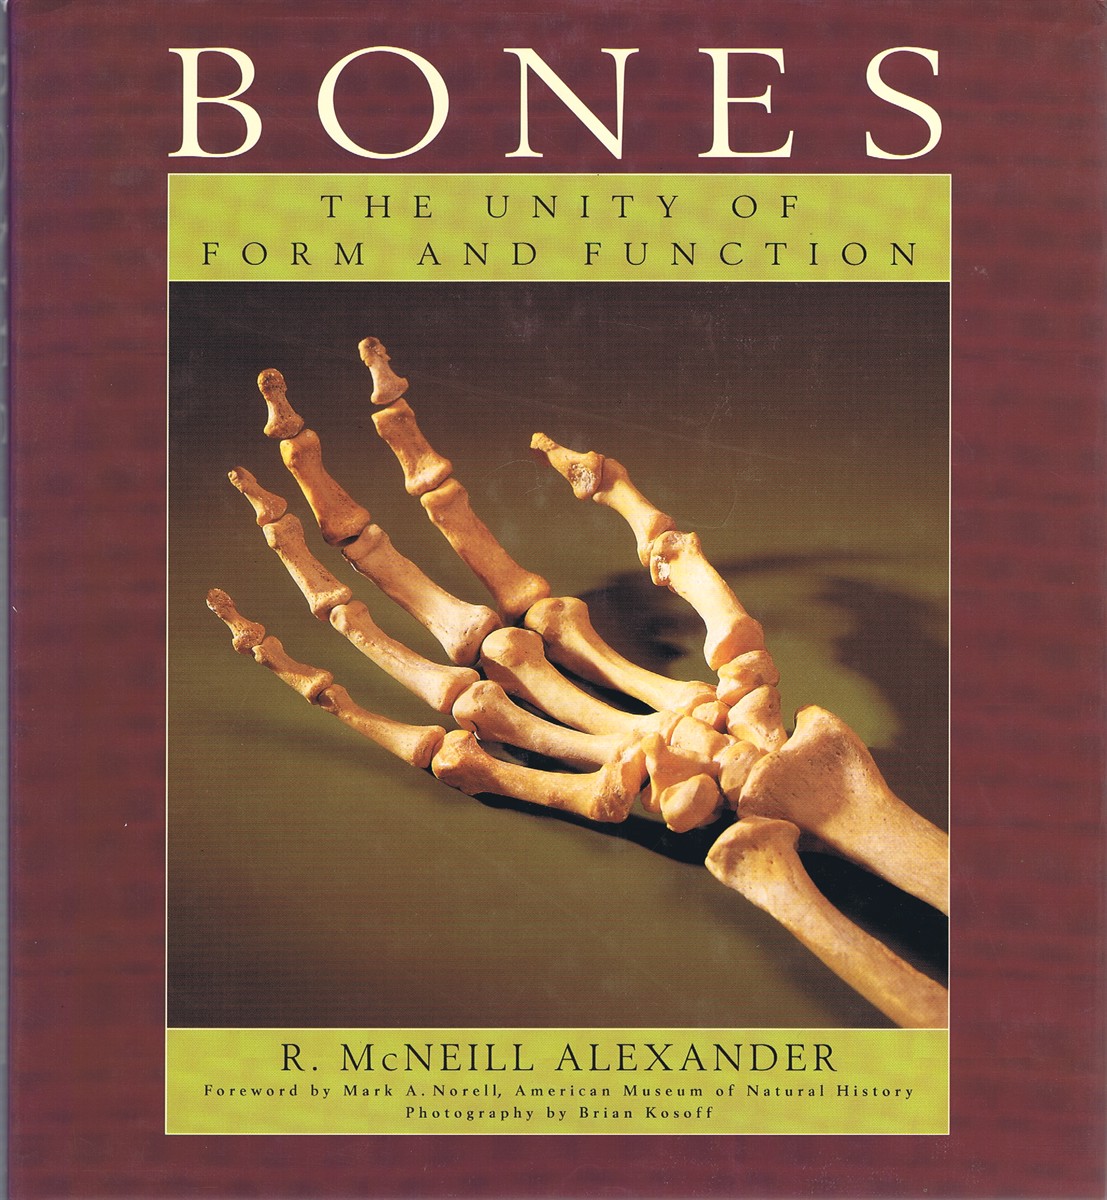 ALEXANDER, R. MCNEILL - Bones: The Unity of Form and Function